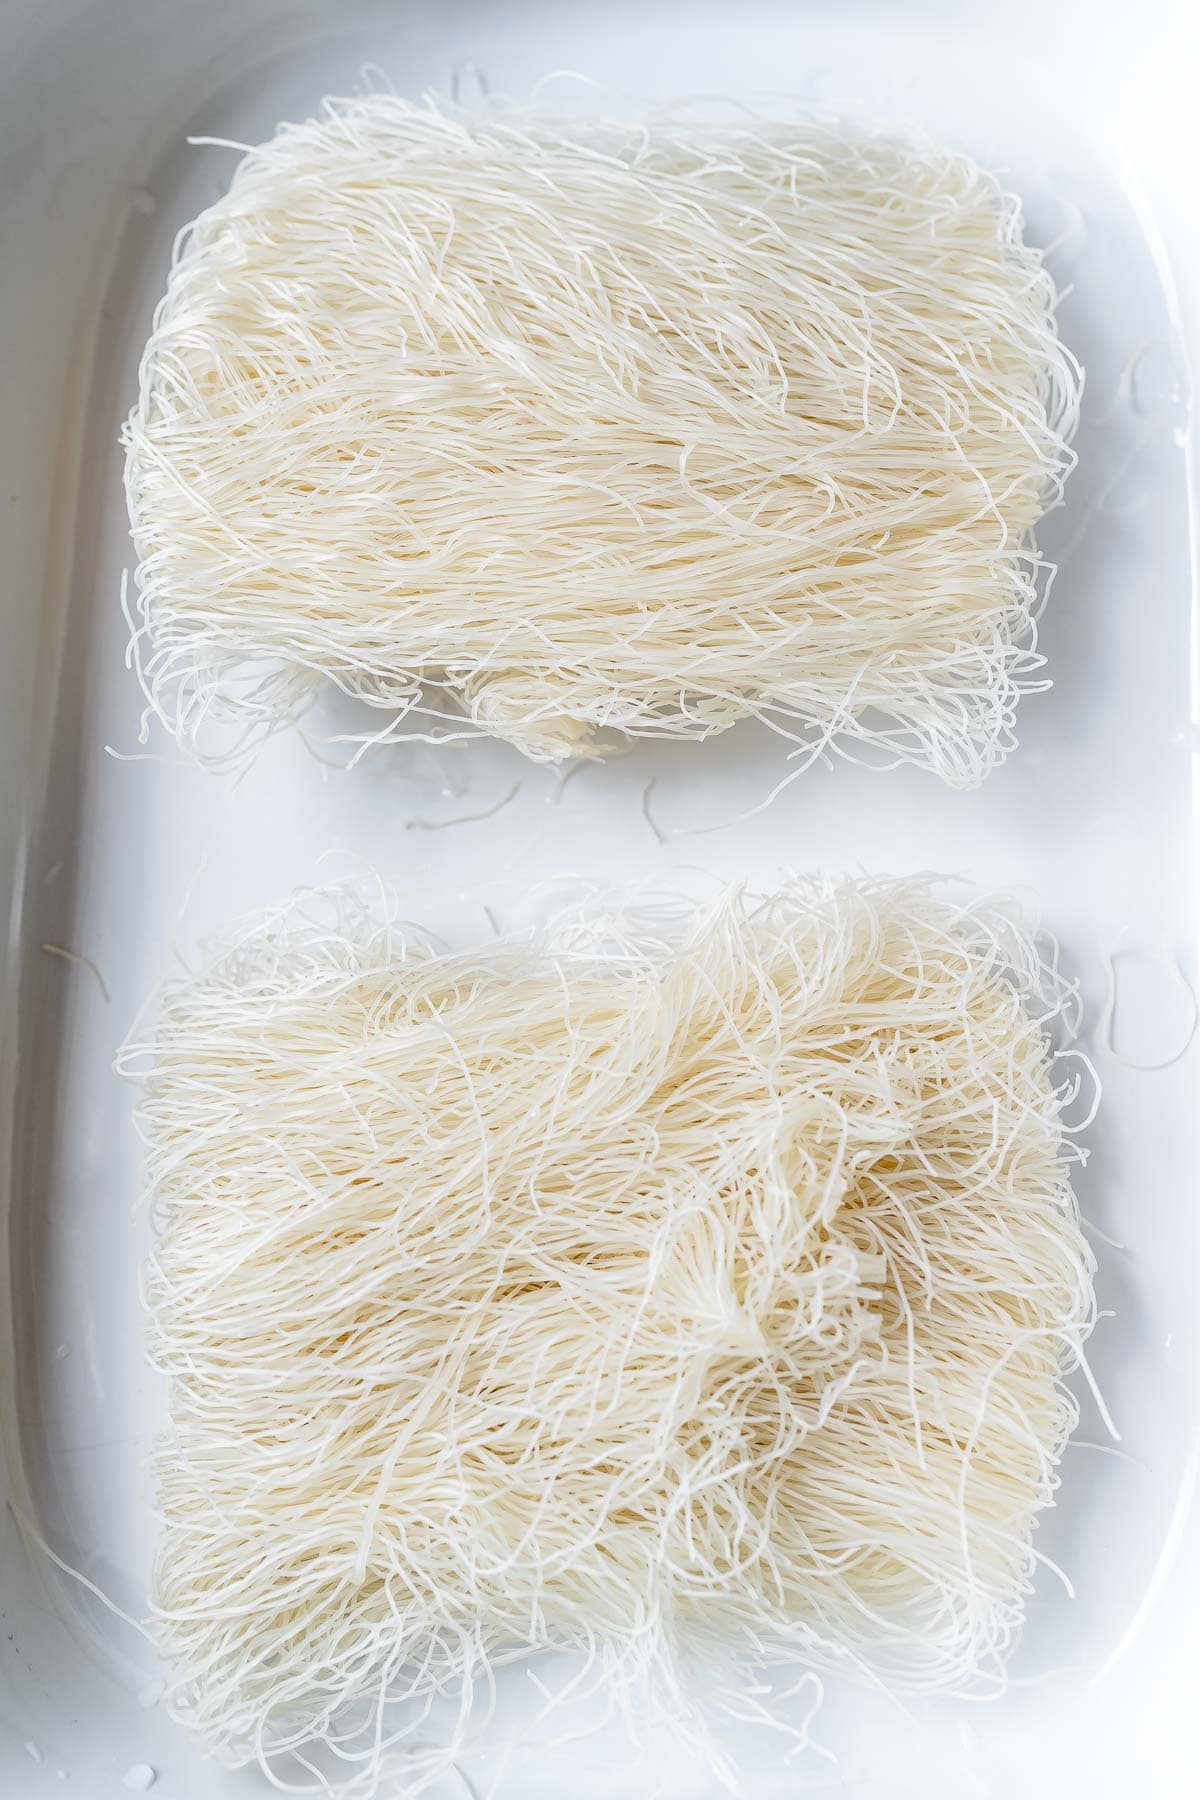 Dried thin noodles resting in a large white baking dish.